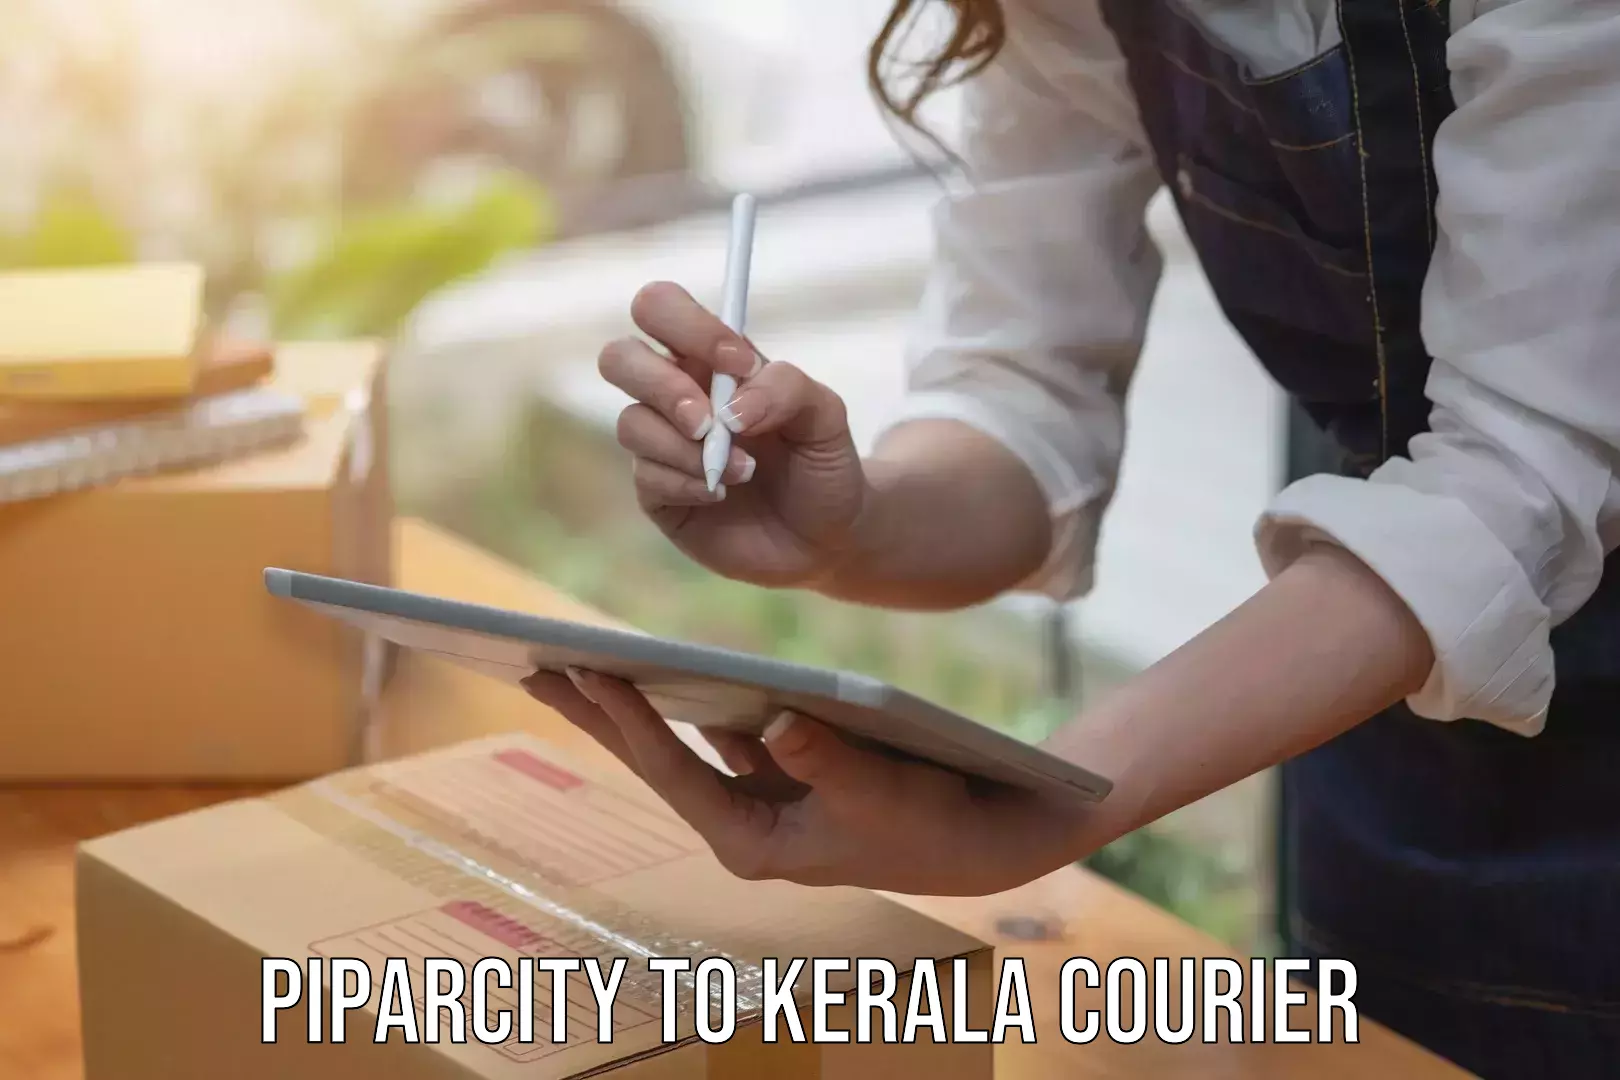 Courier membership in Piparcity to Kerala